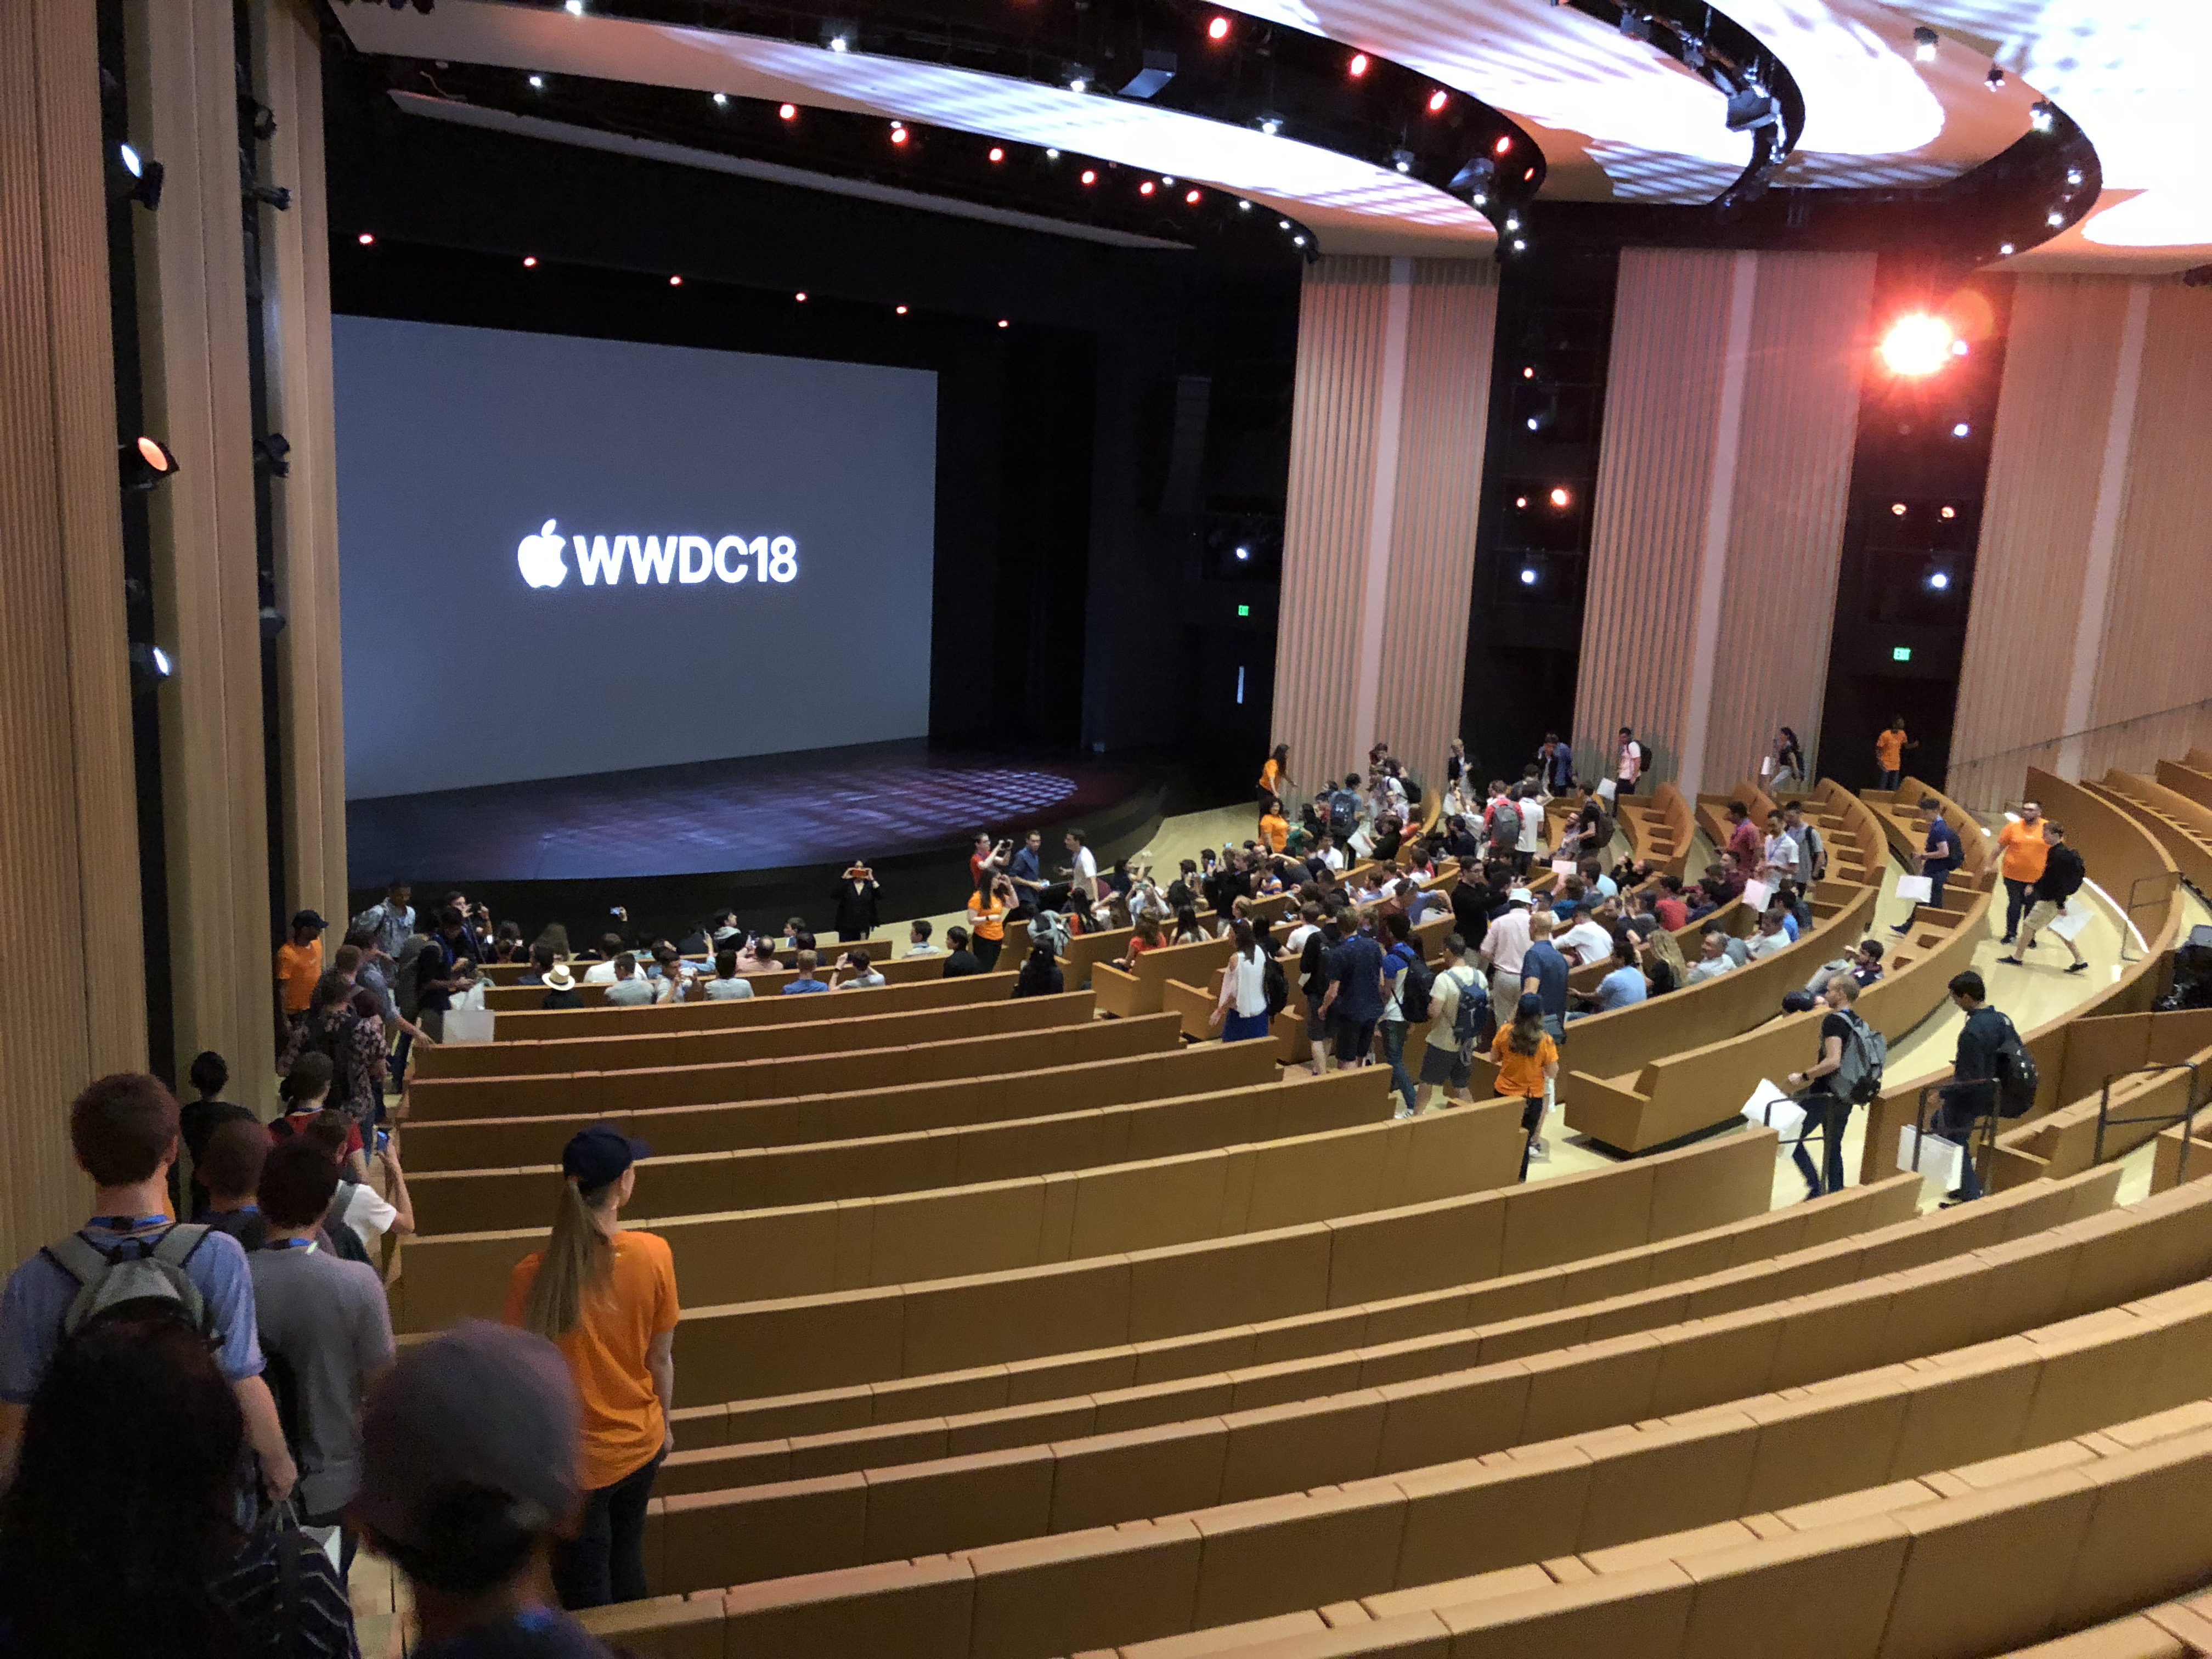 Filing into the Steve Jobs Theater